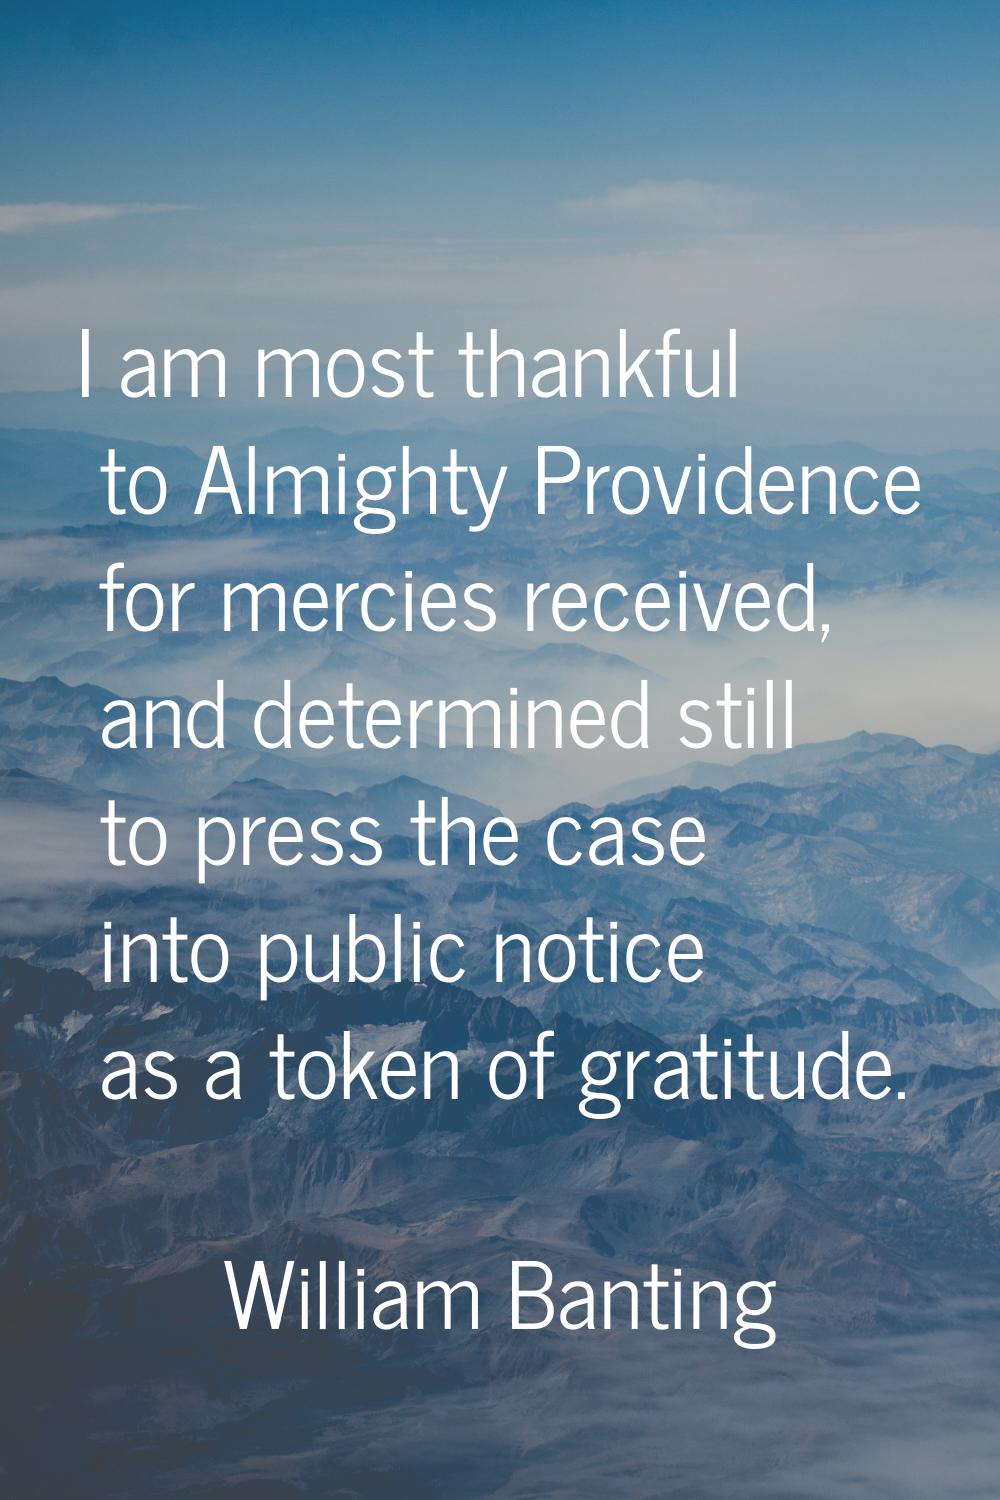 I am most thankful to Almighty Providence for mercies received, and determined still to press the c